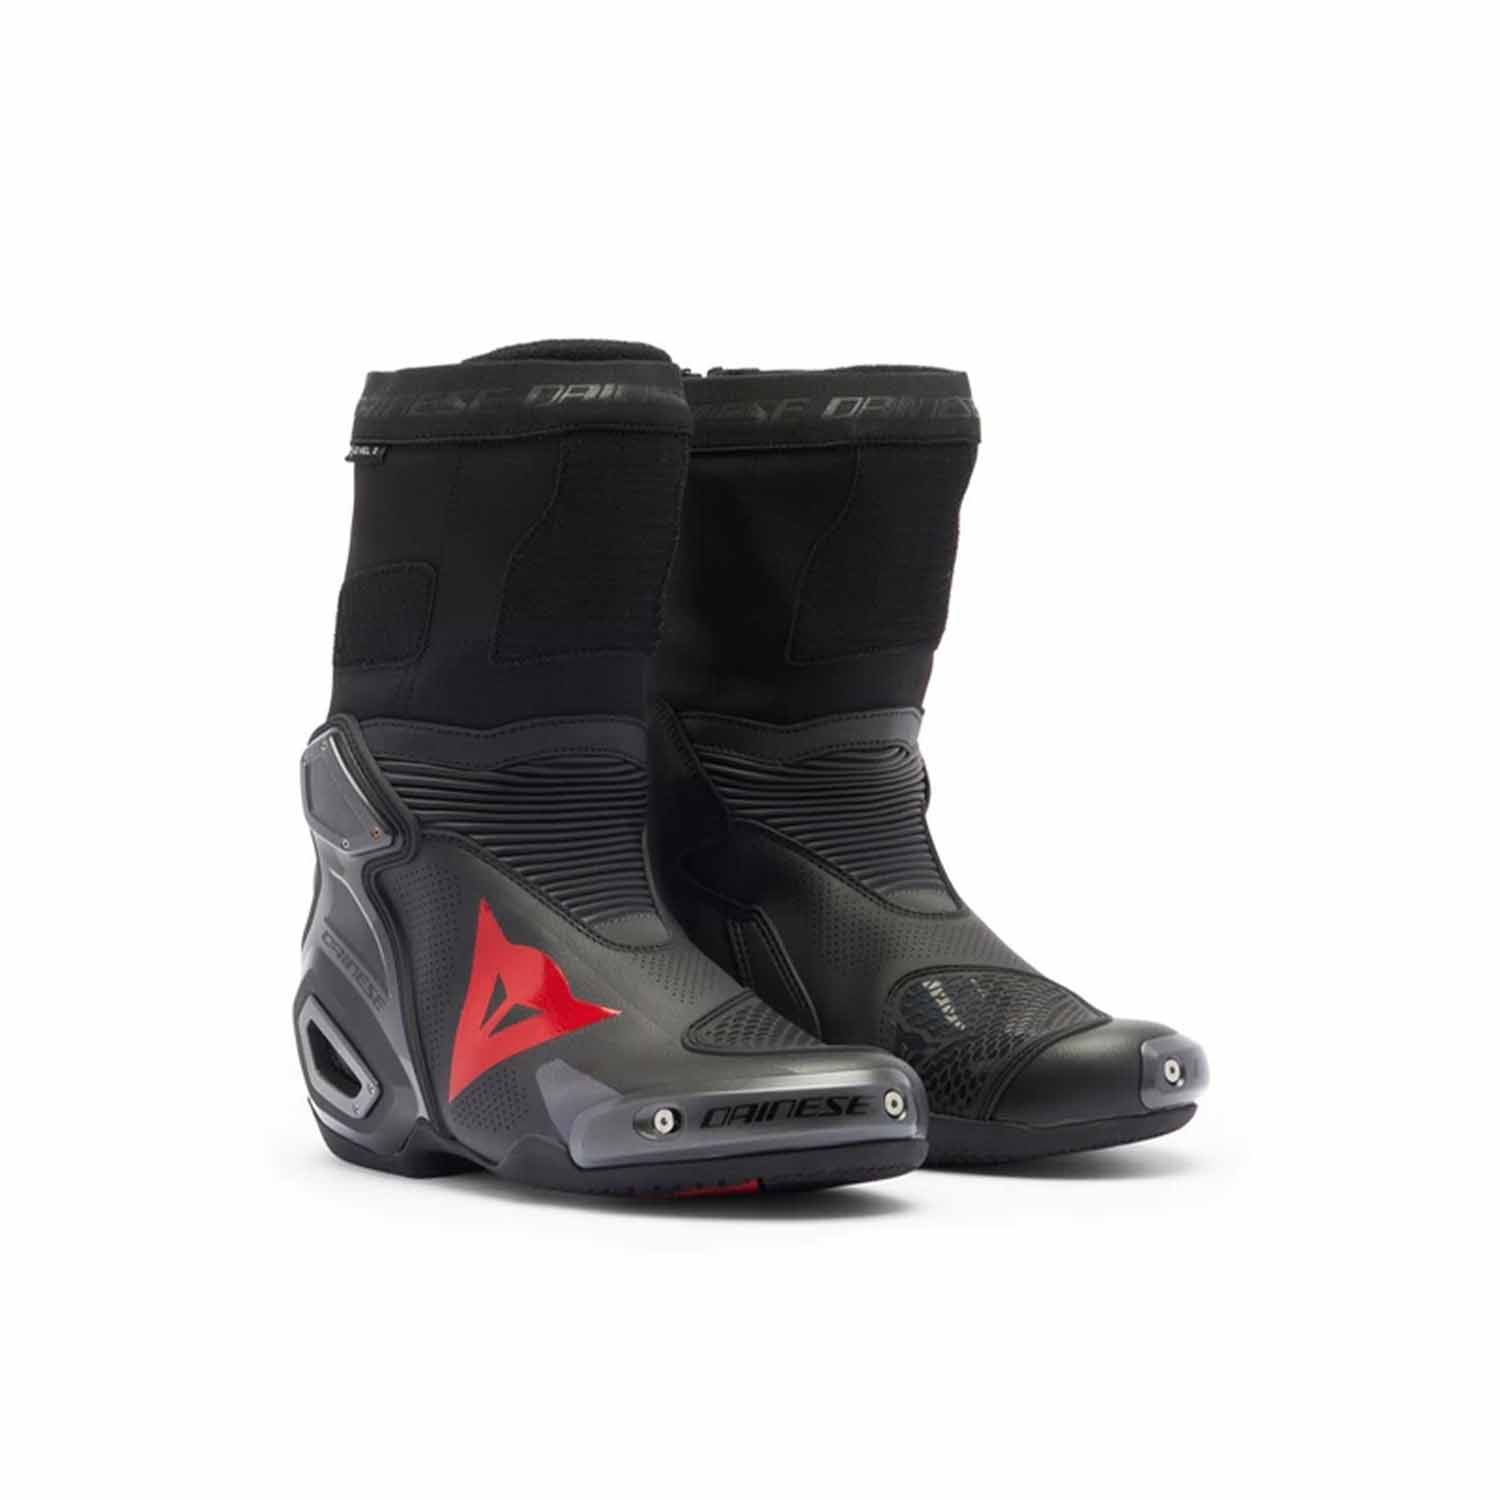 Image of Dainese Axial 2 Air Boots Black Black Red Fluo Talla 40